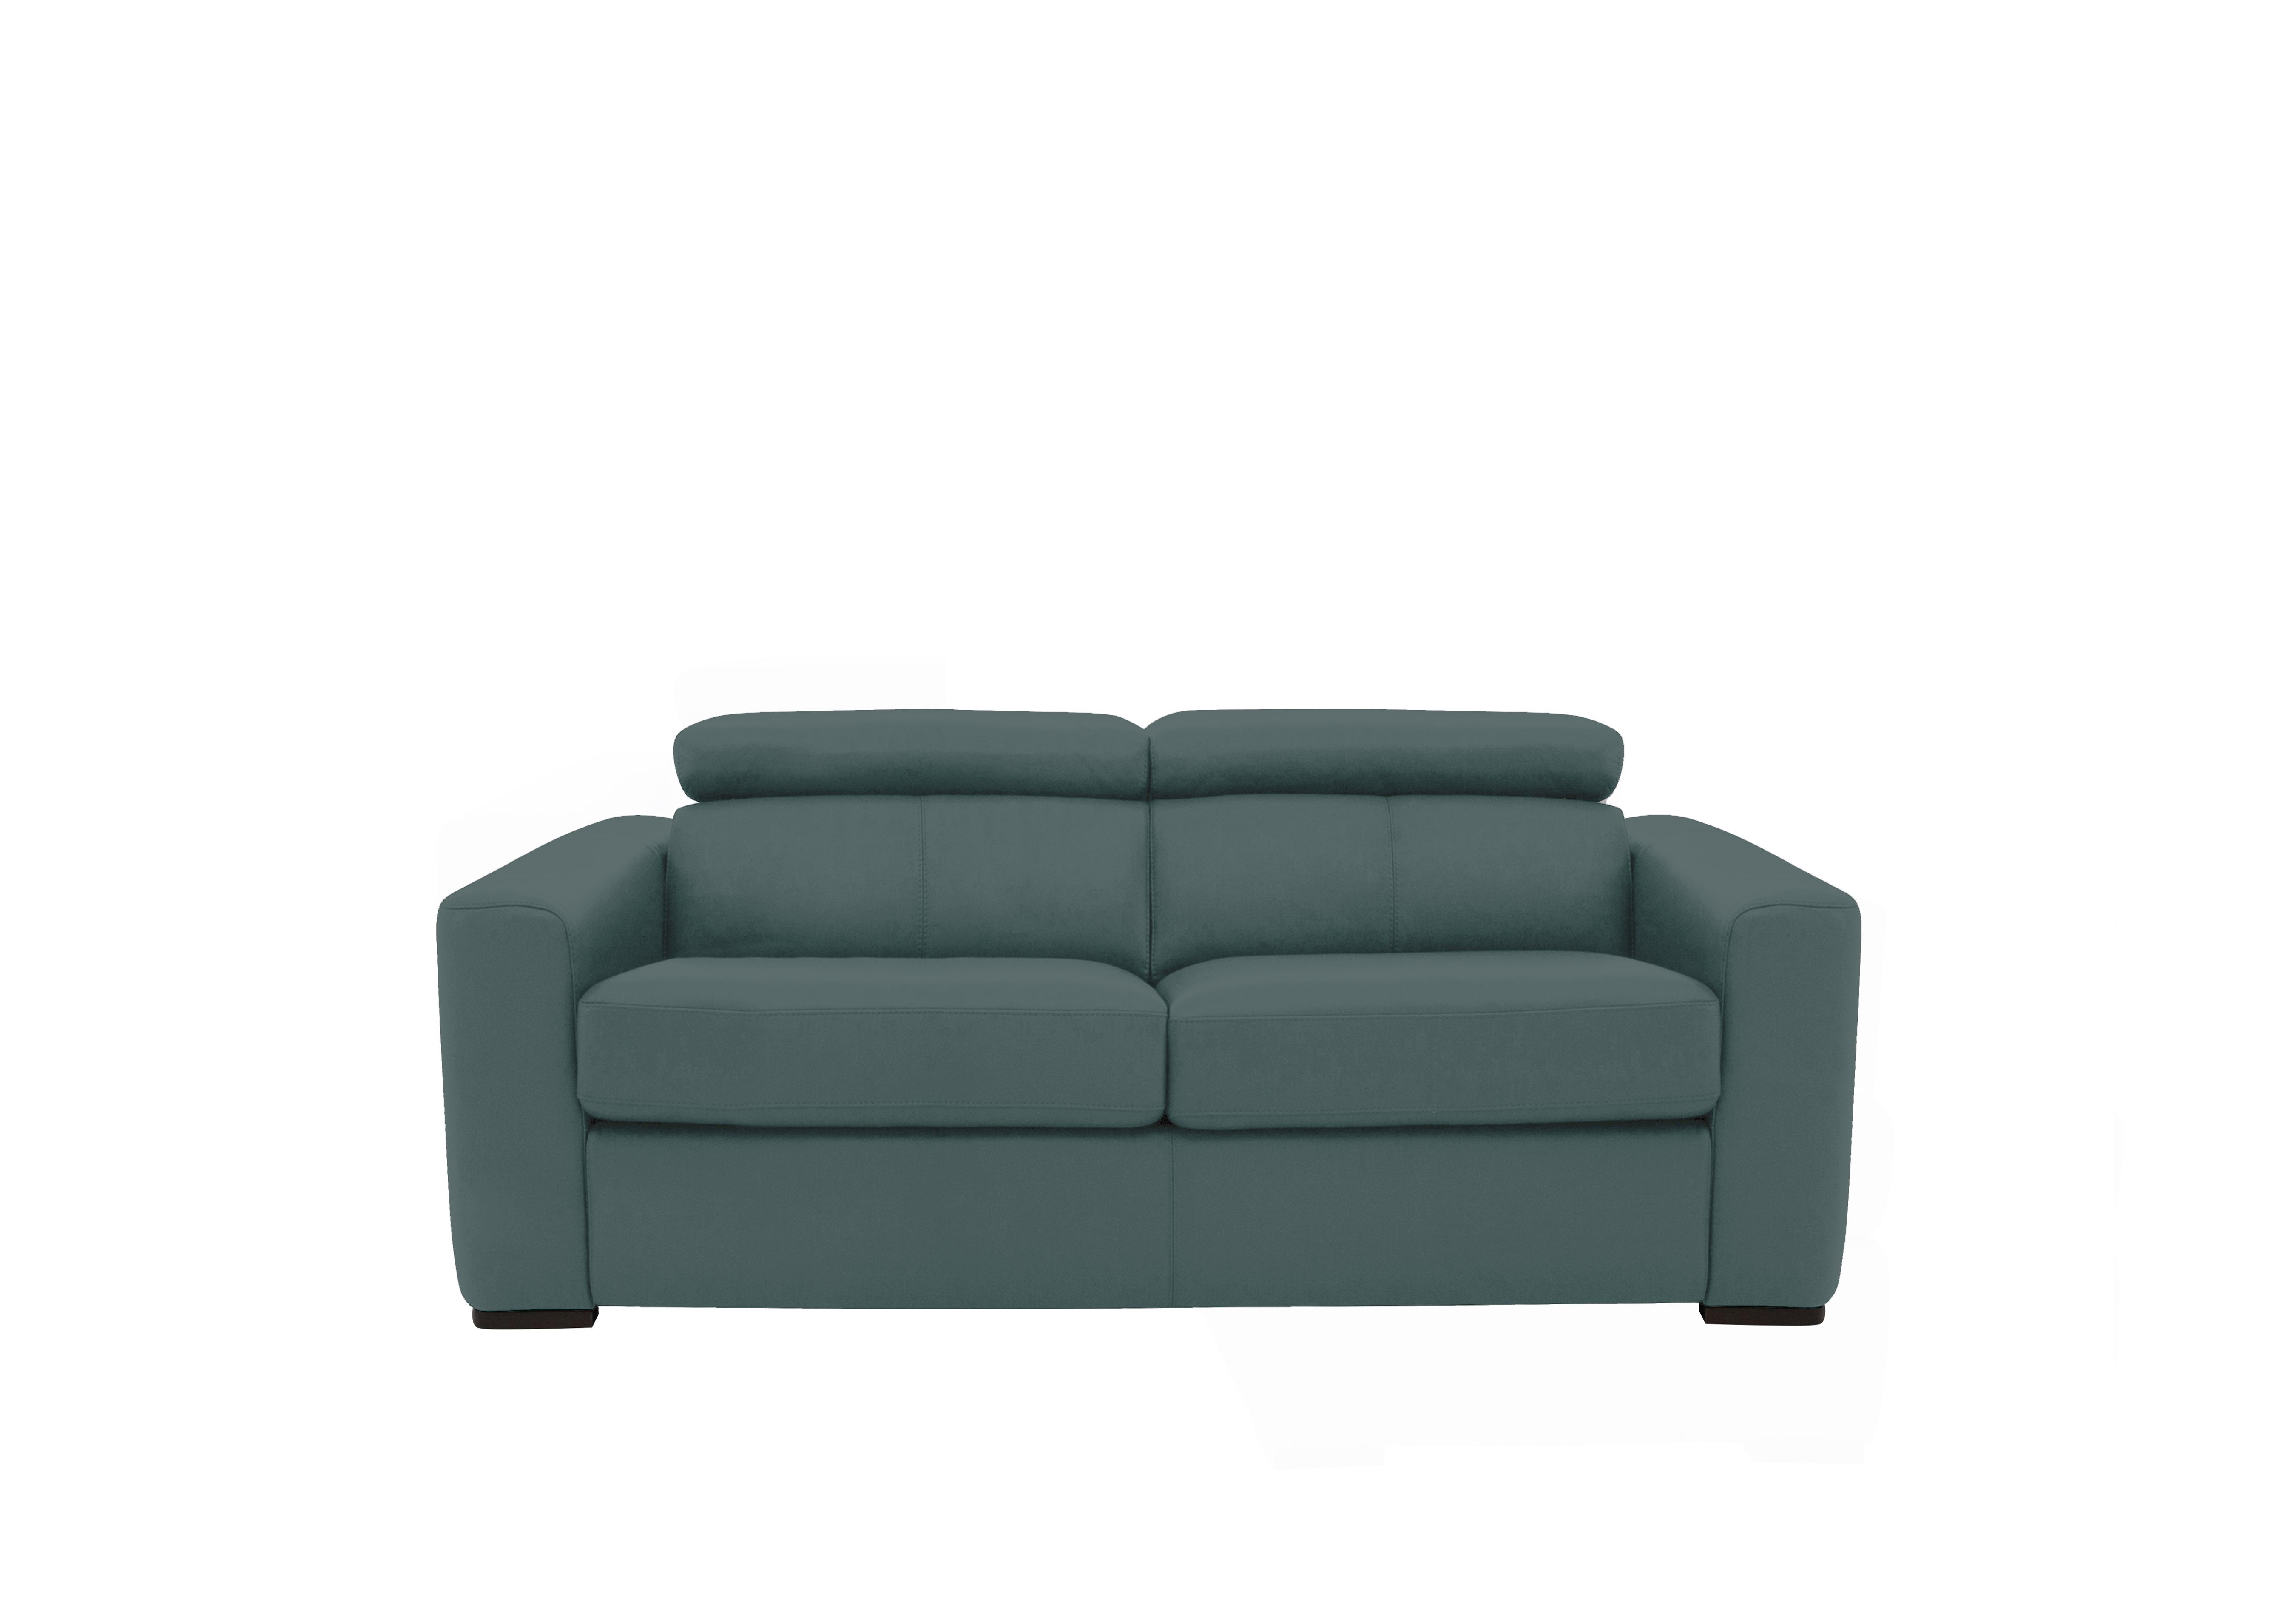 Infinity 2 Seater Leather Sofa in Bv-301e Lake Green on Furniture Village